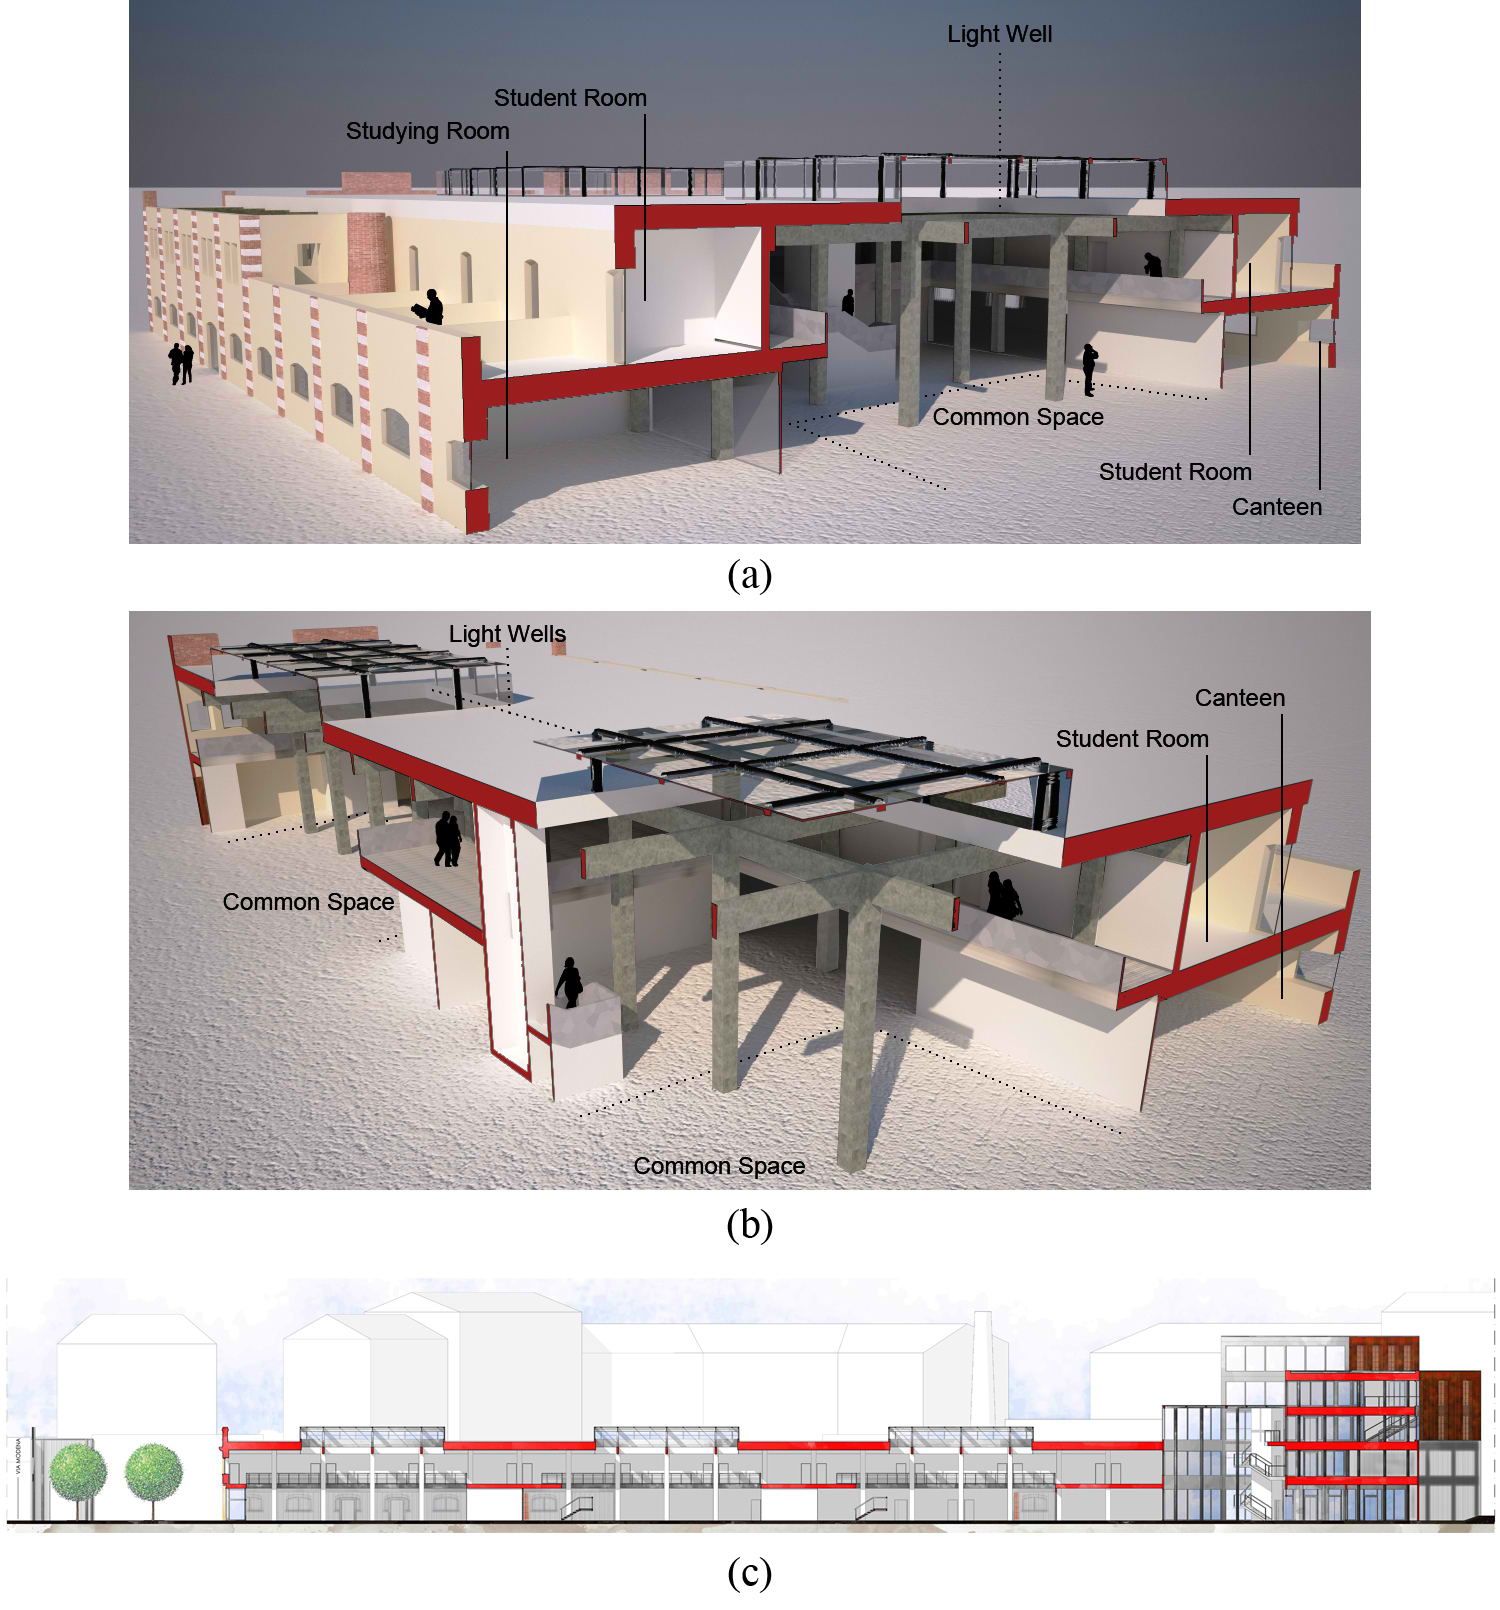 Renders and project images of the daylighting concept developed for the ‘Gallettificio’ (a) 3D cross section of the building, (b) 3D section (endwise and crosswise) with a detailed view of one of the light wells, and (c) side view of the building.